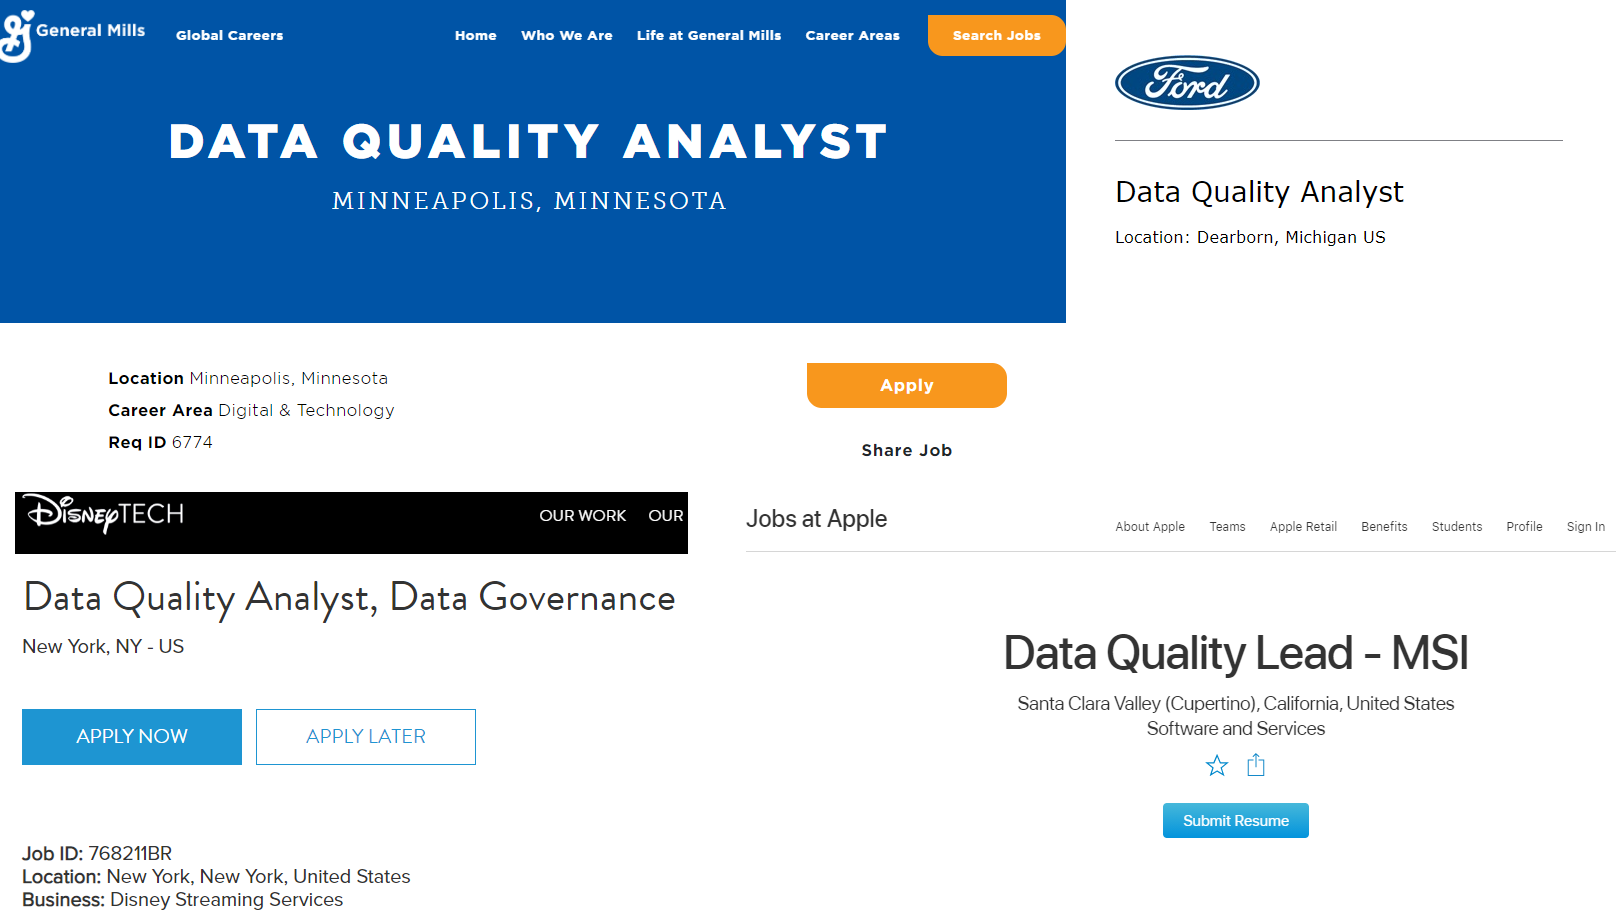 Data quality job posting examples: Data Quality Analyst at General Mills, Data Quality Analyst at Ford, Data Quality Analyst, Data Governance at Disney Streaming Services, Data Quality Lead at Apple